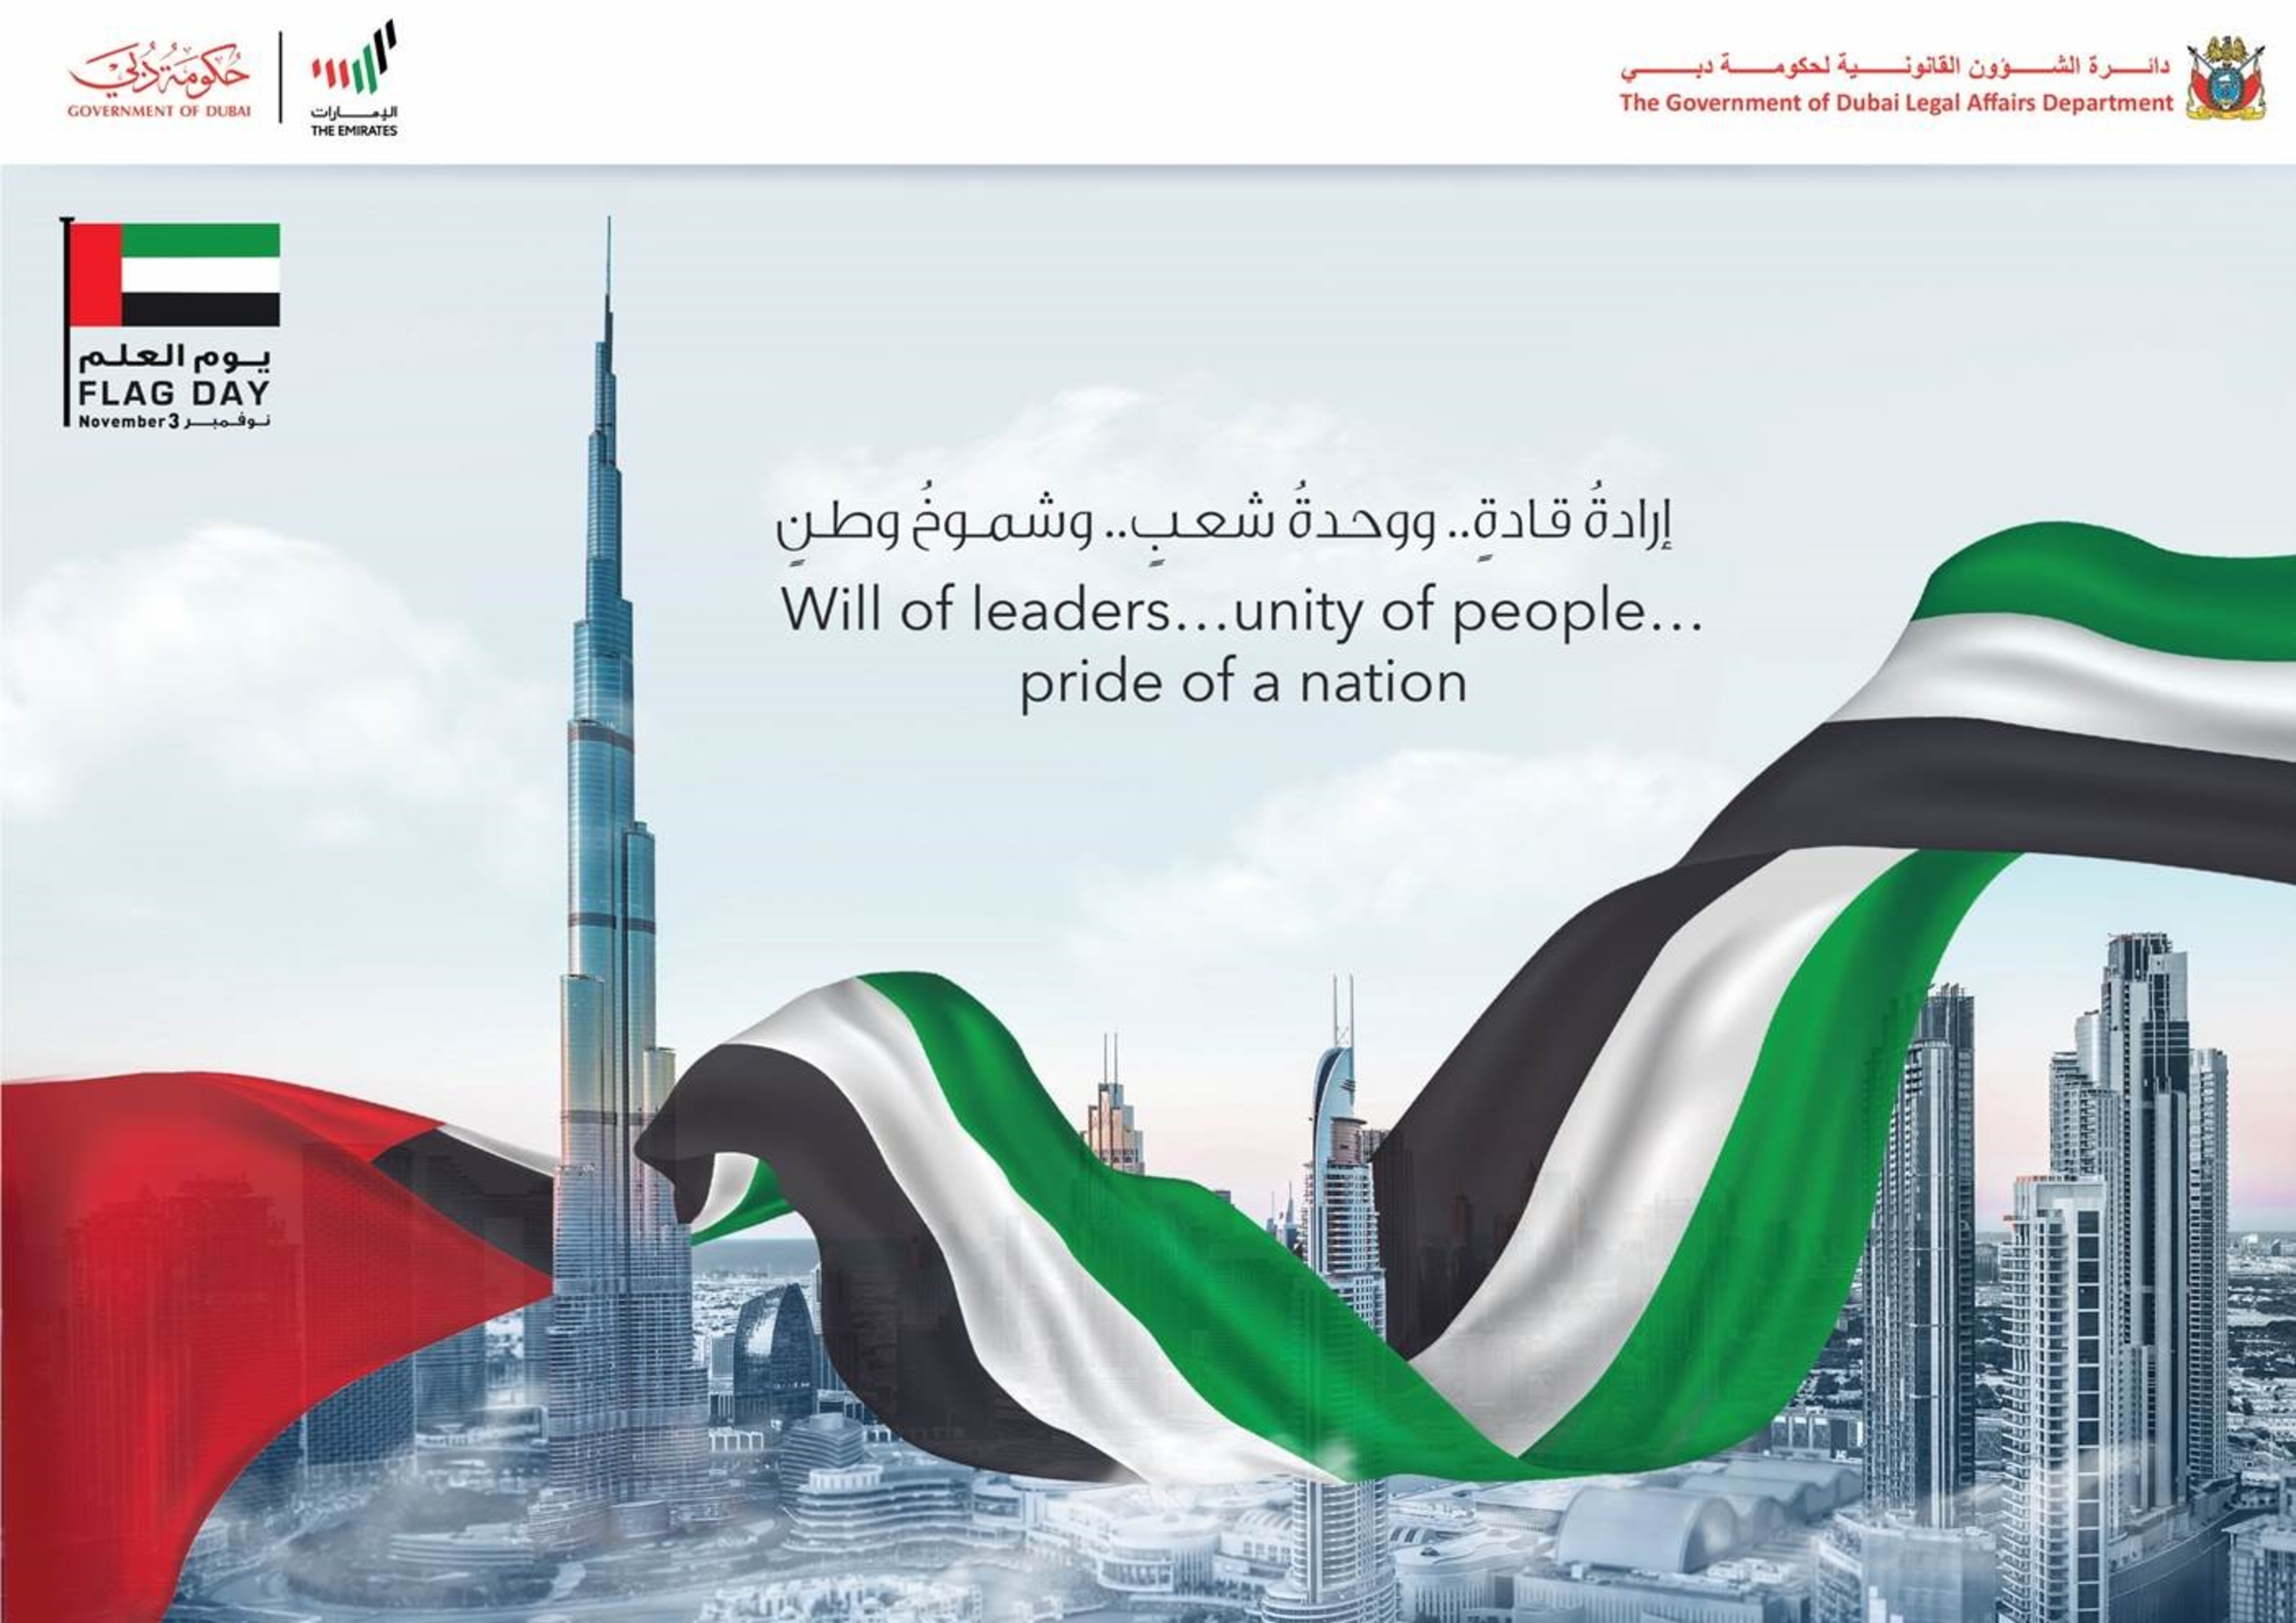 Statement of His Excellency,  Director General of the Government of Dubai Legal Affairs Department on the Occasion of the Flag Day